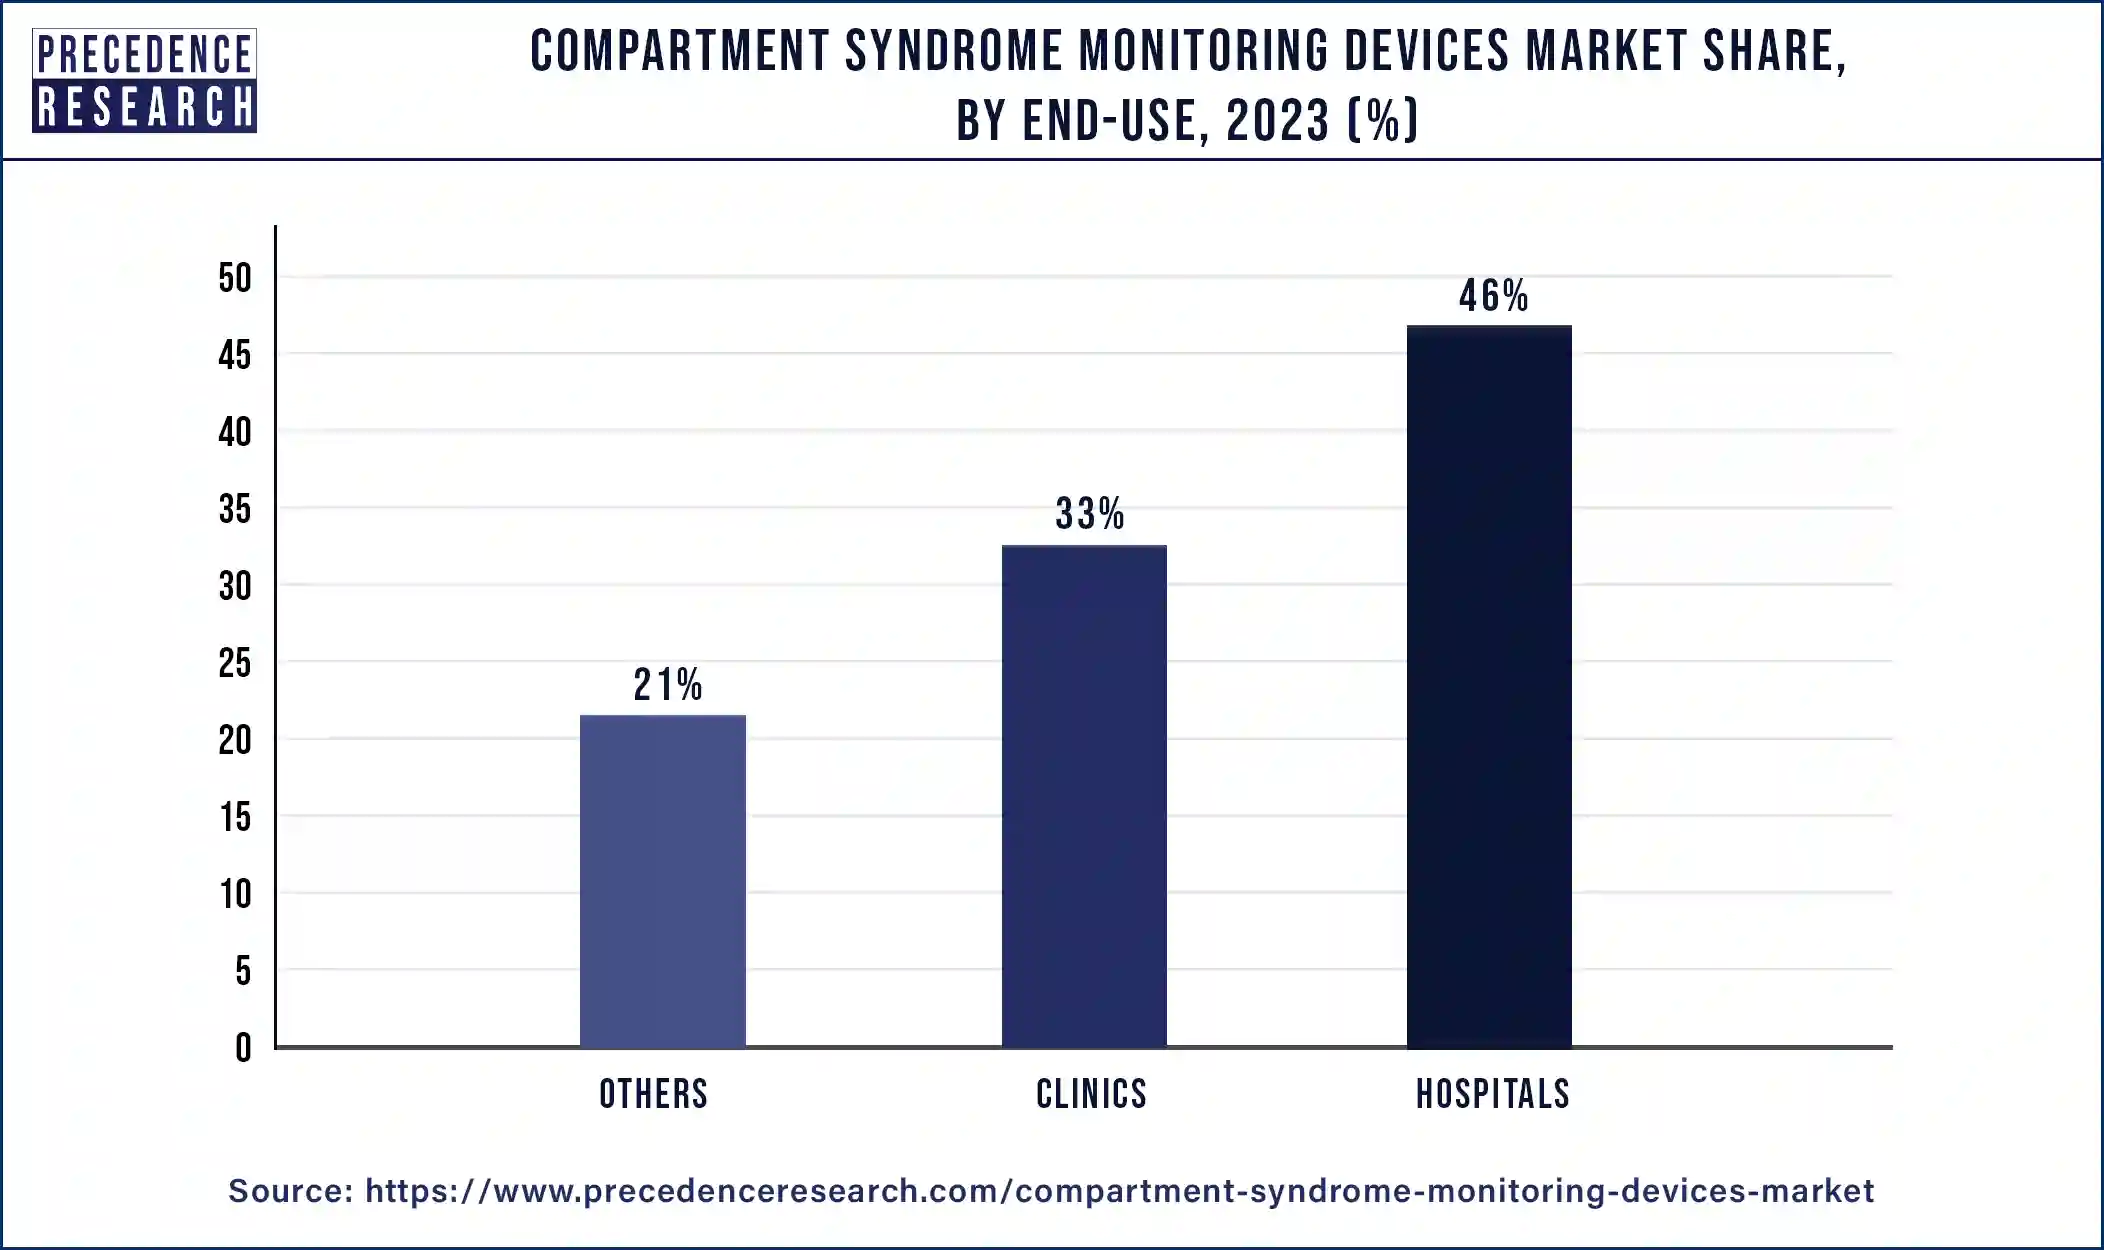 Compartment Syndrome Monitoring Devices Market Share, By End-use, 2023 (%)